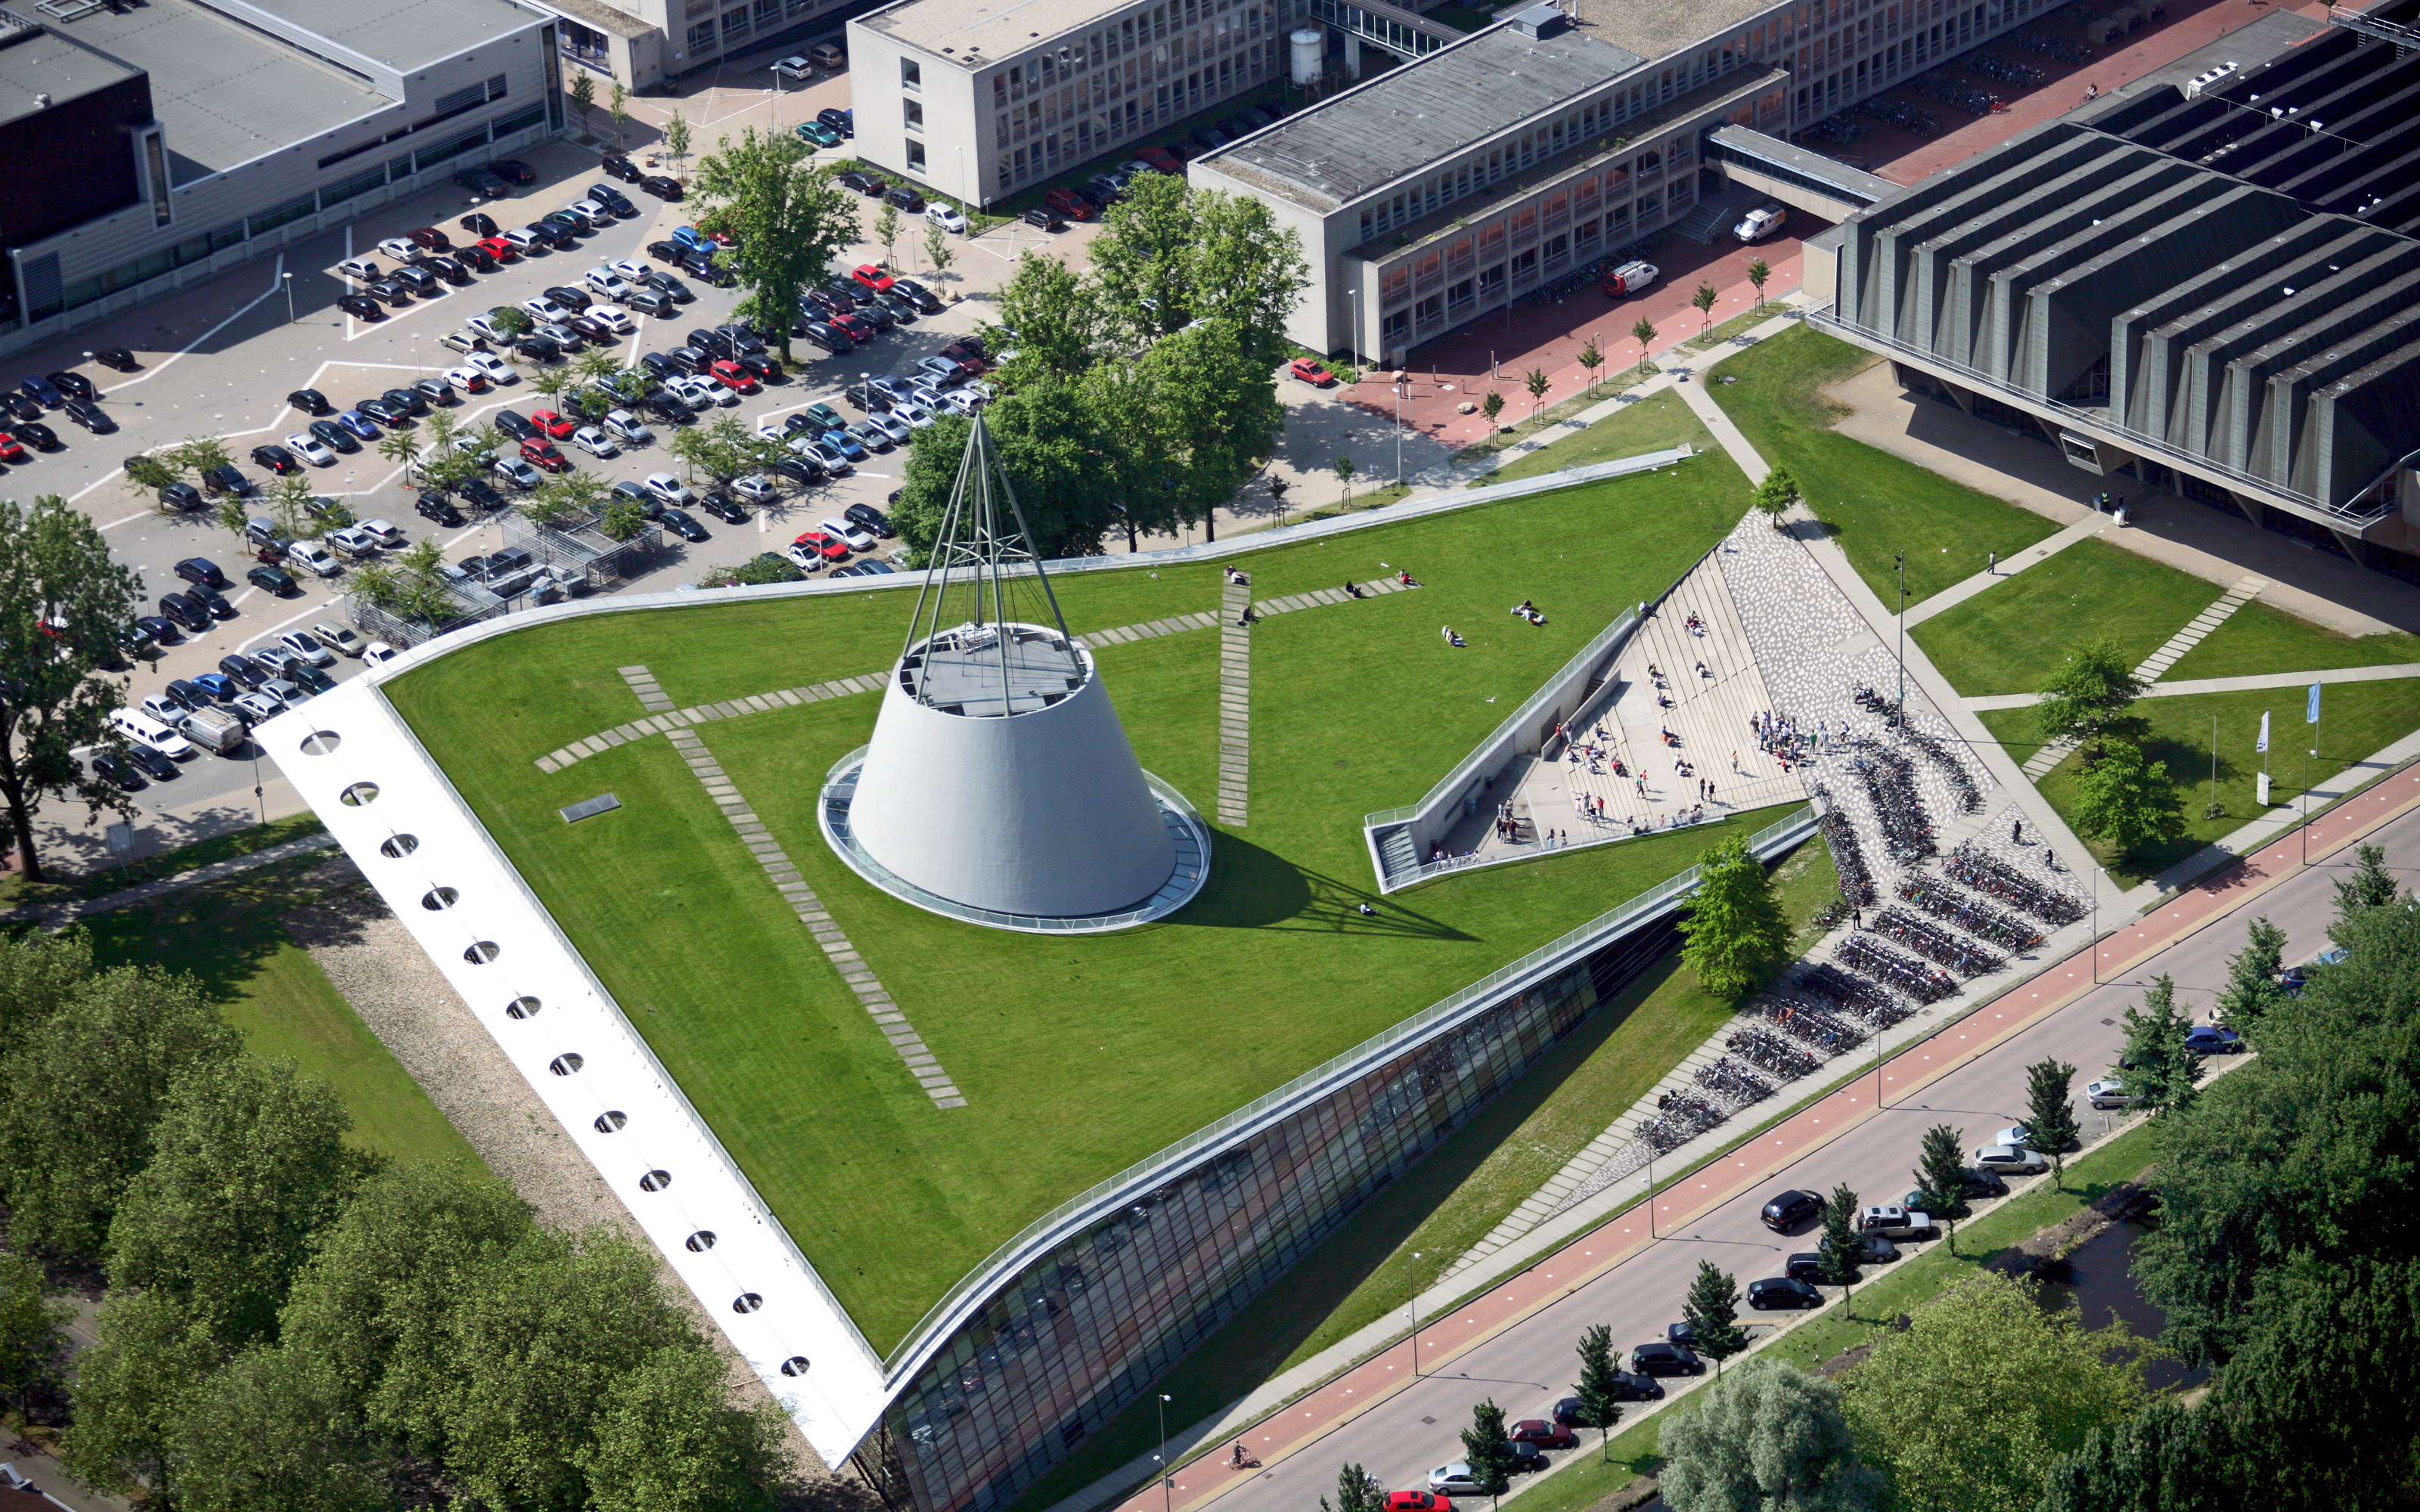 Bird's eye view of the library building with the green roof